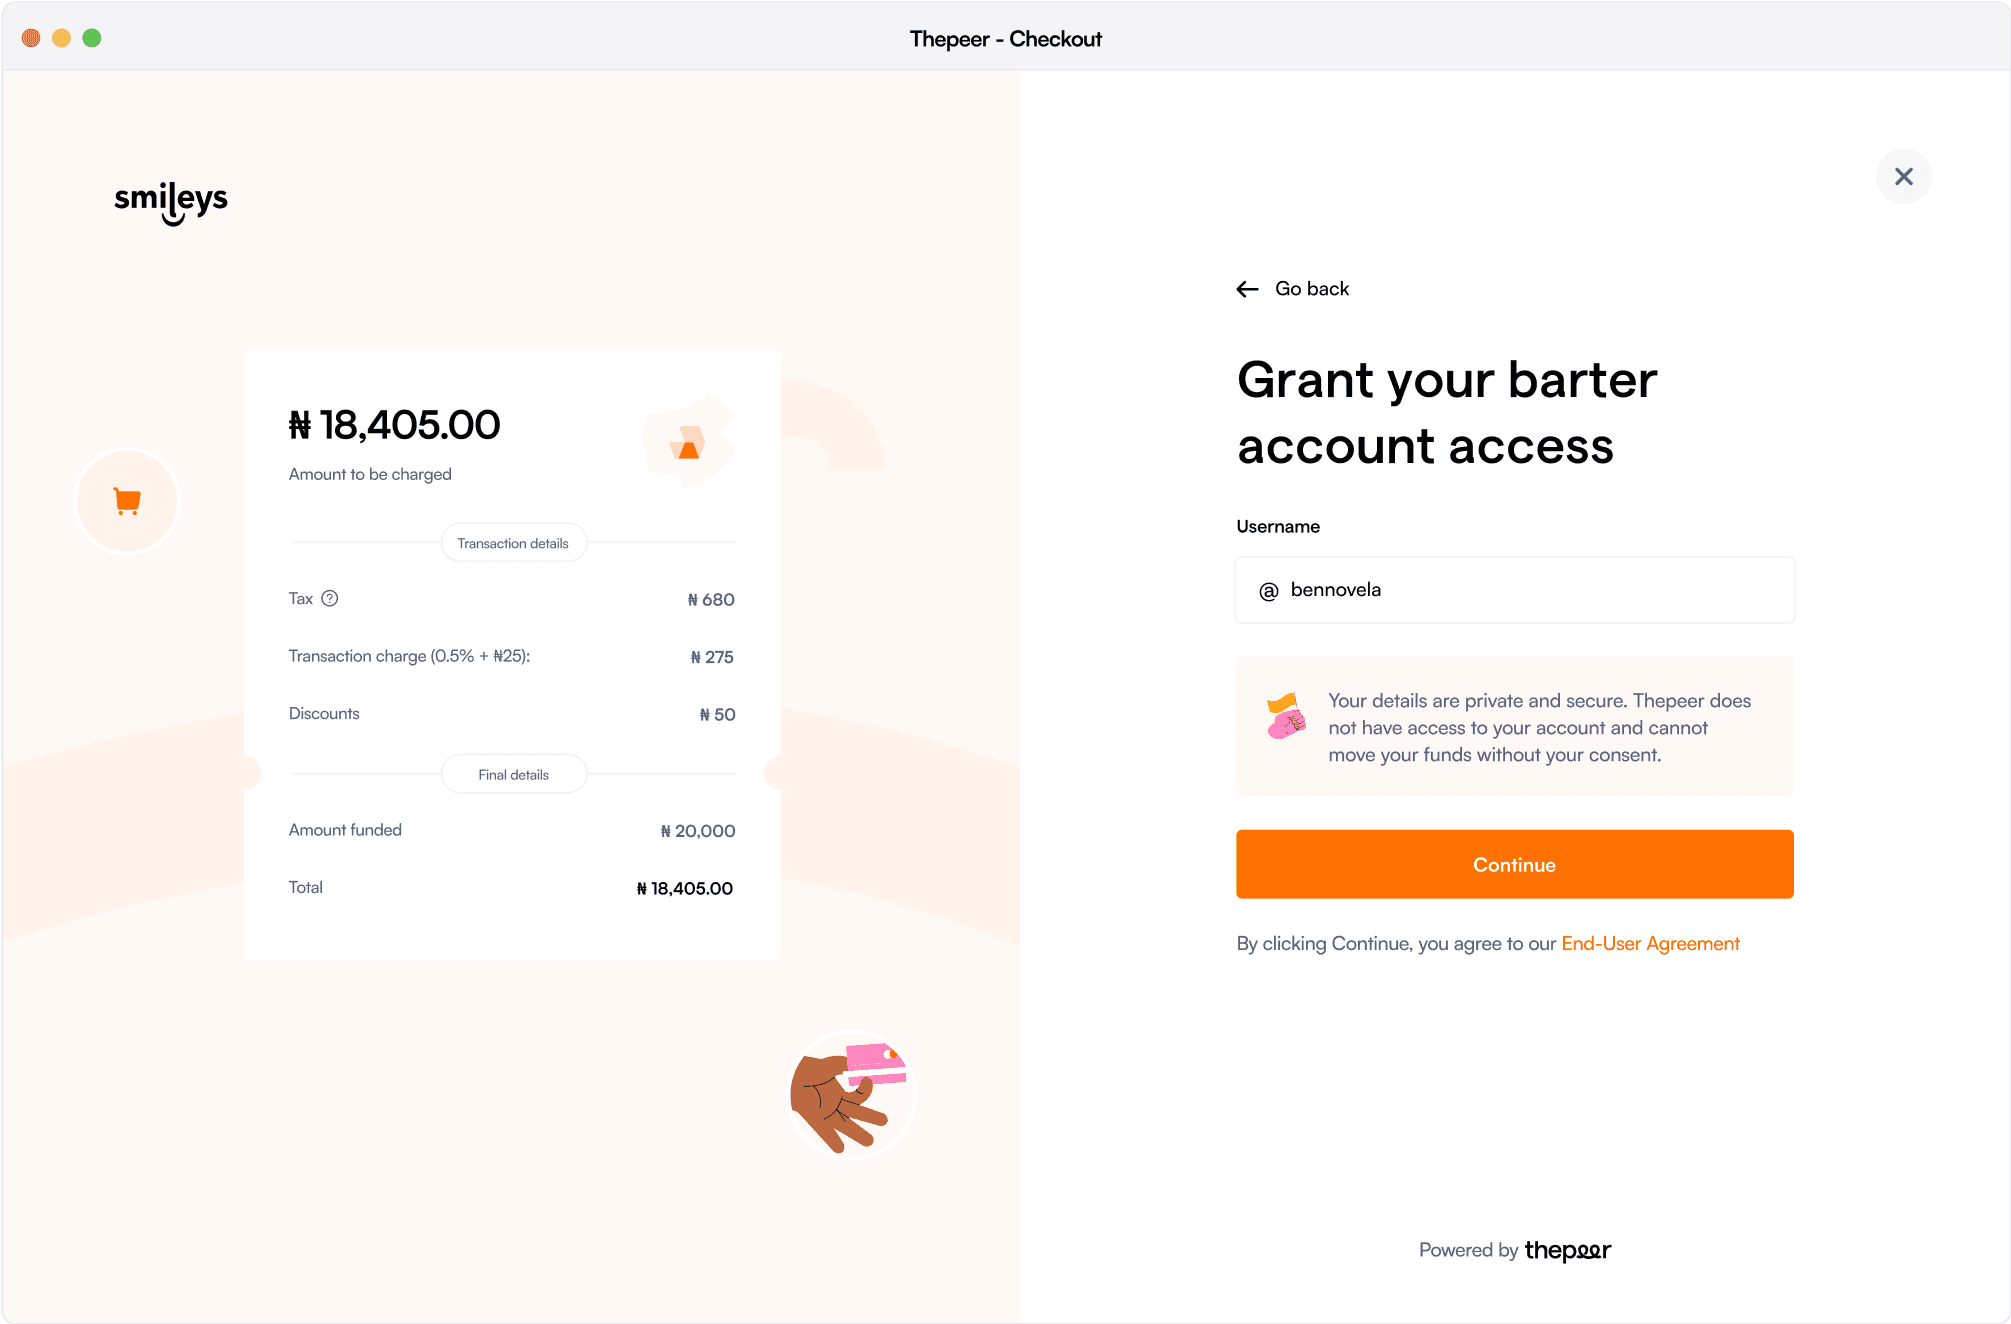 An image showing how to link your thepeer's account.